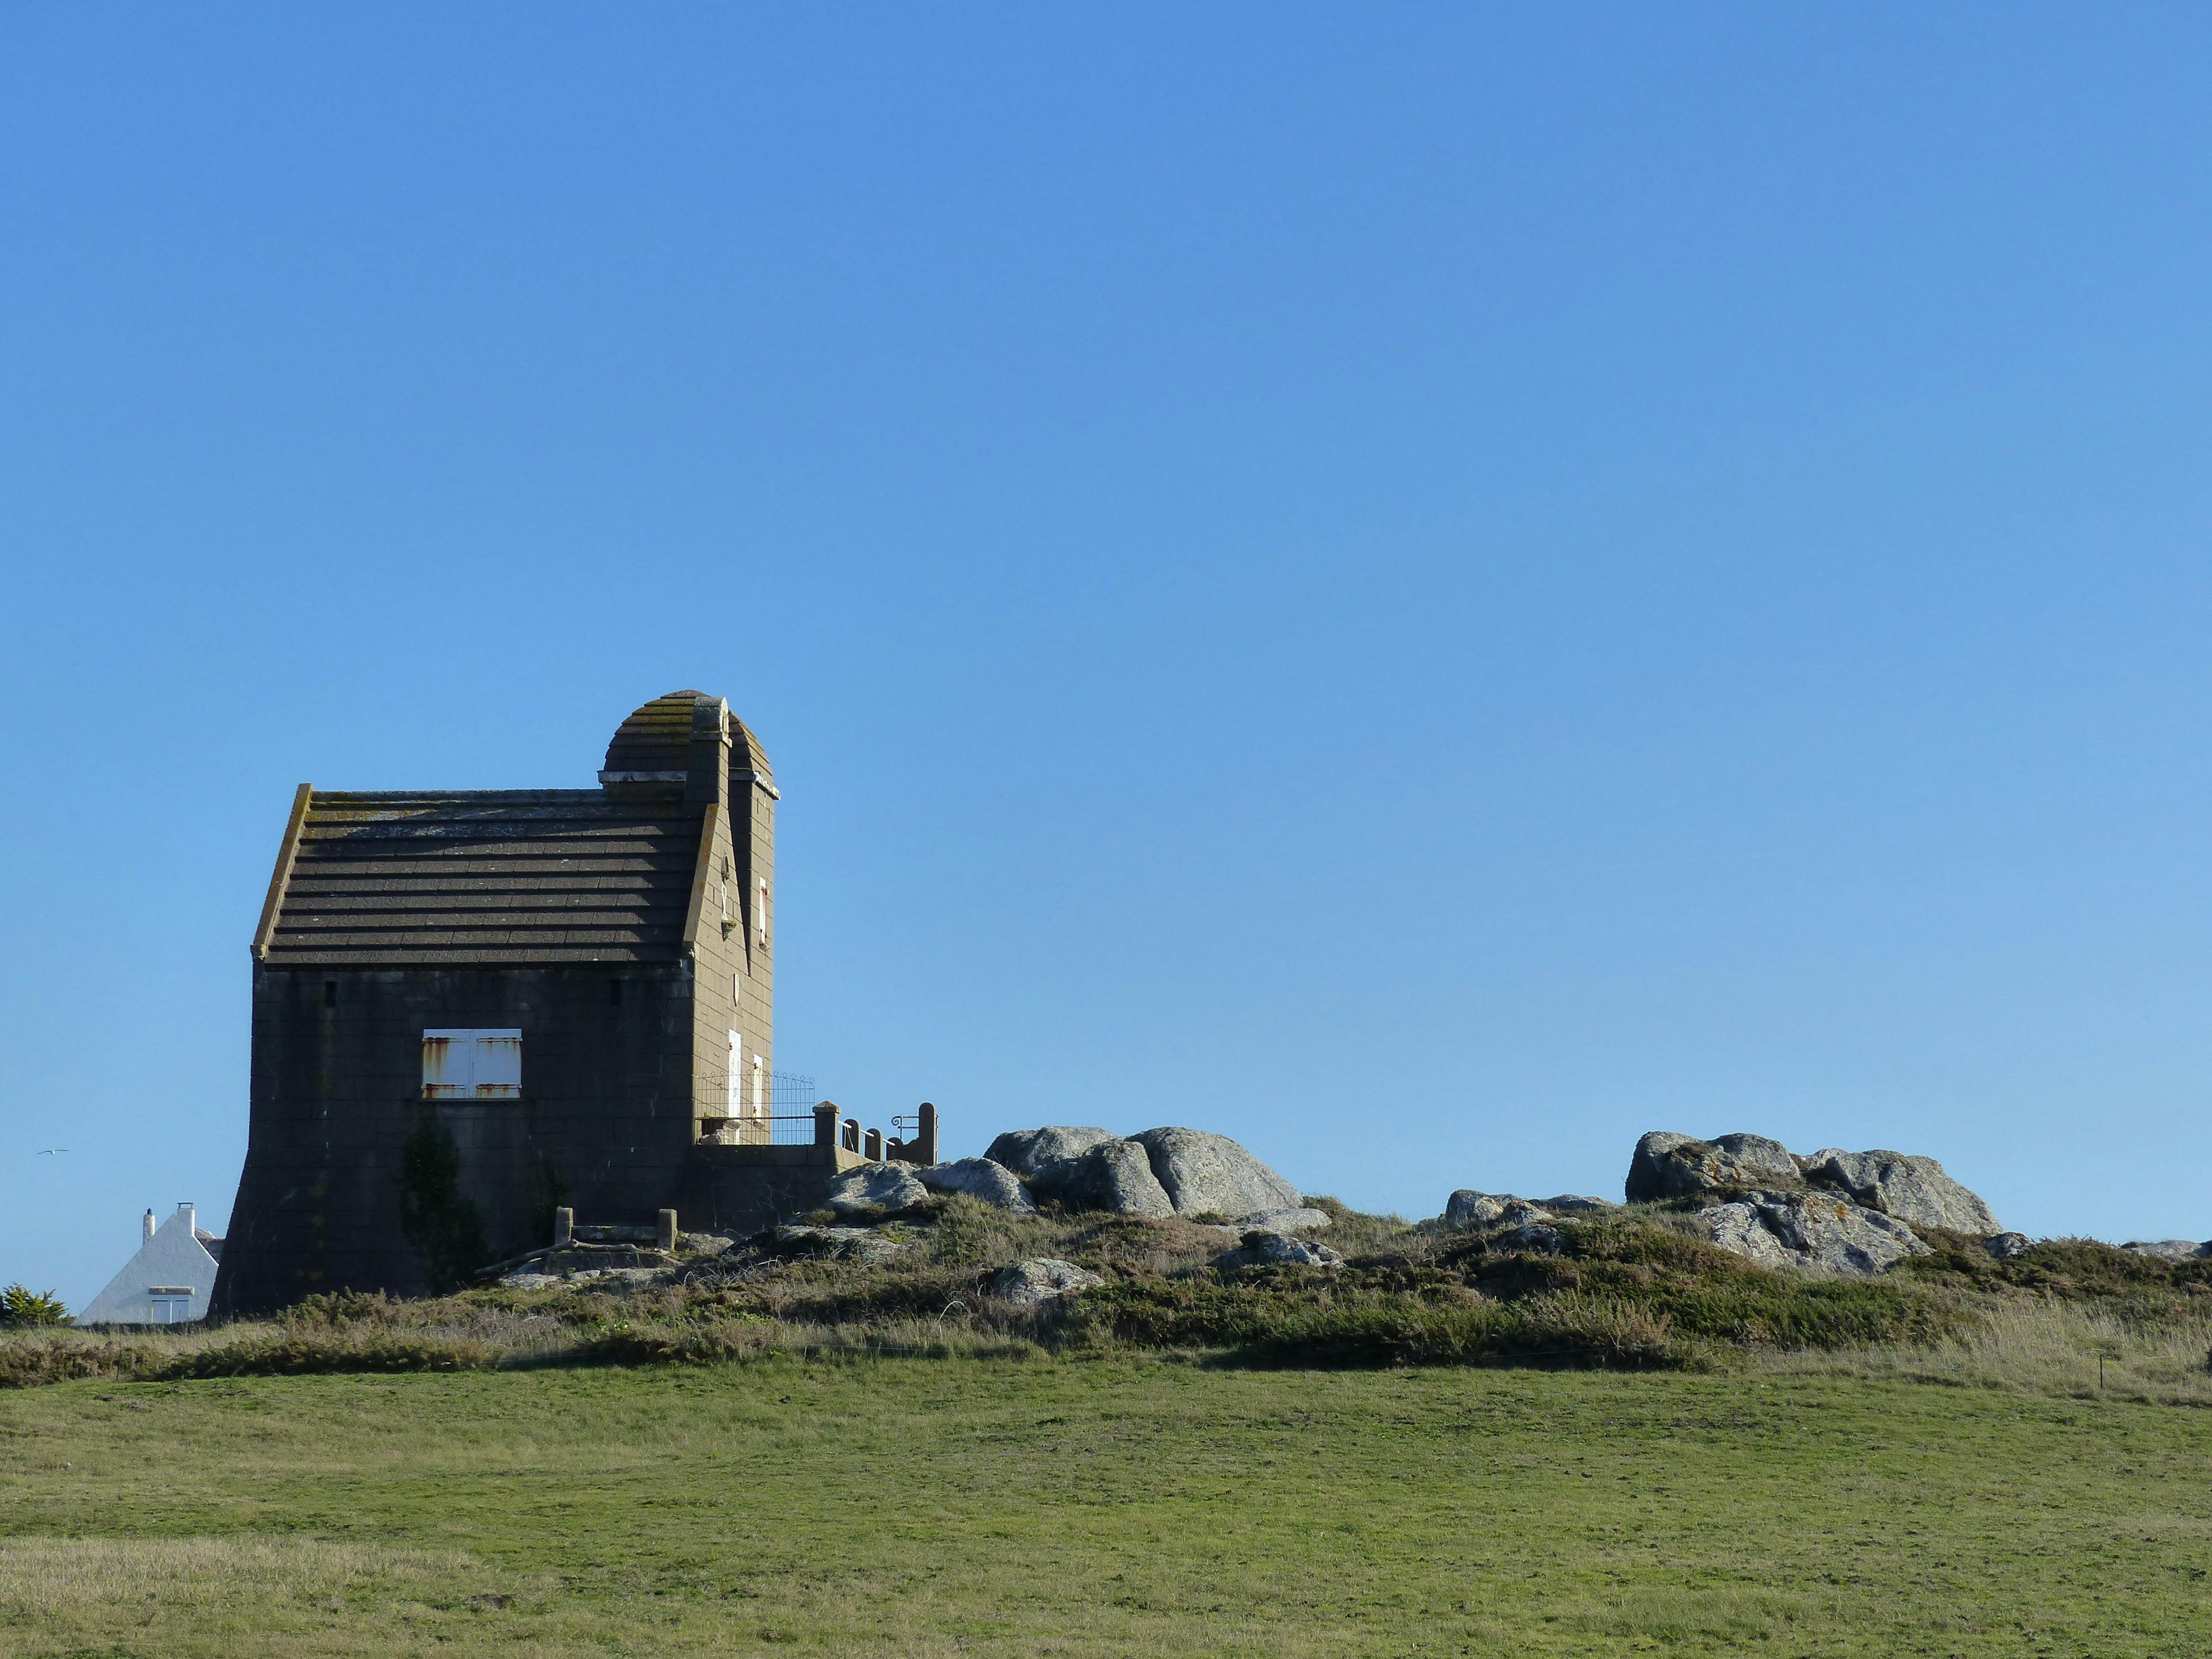 aged house on grassy hill under clear blue sky